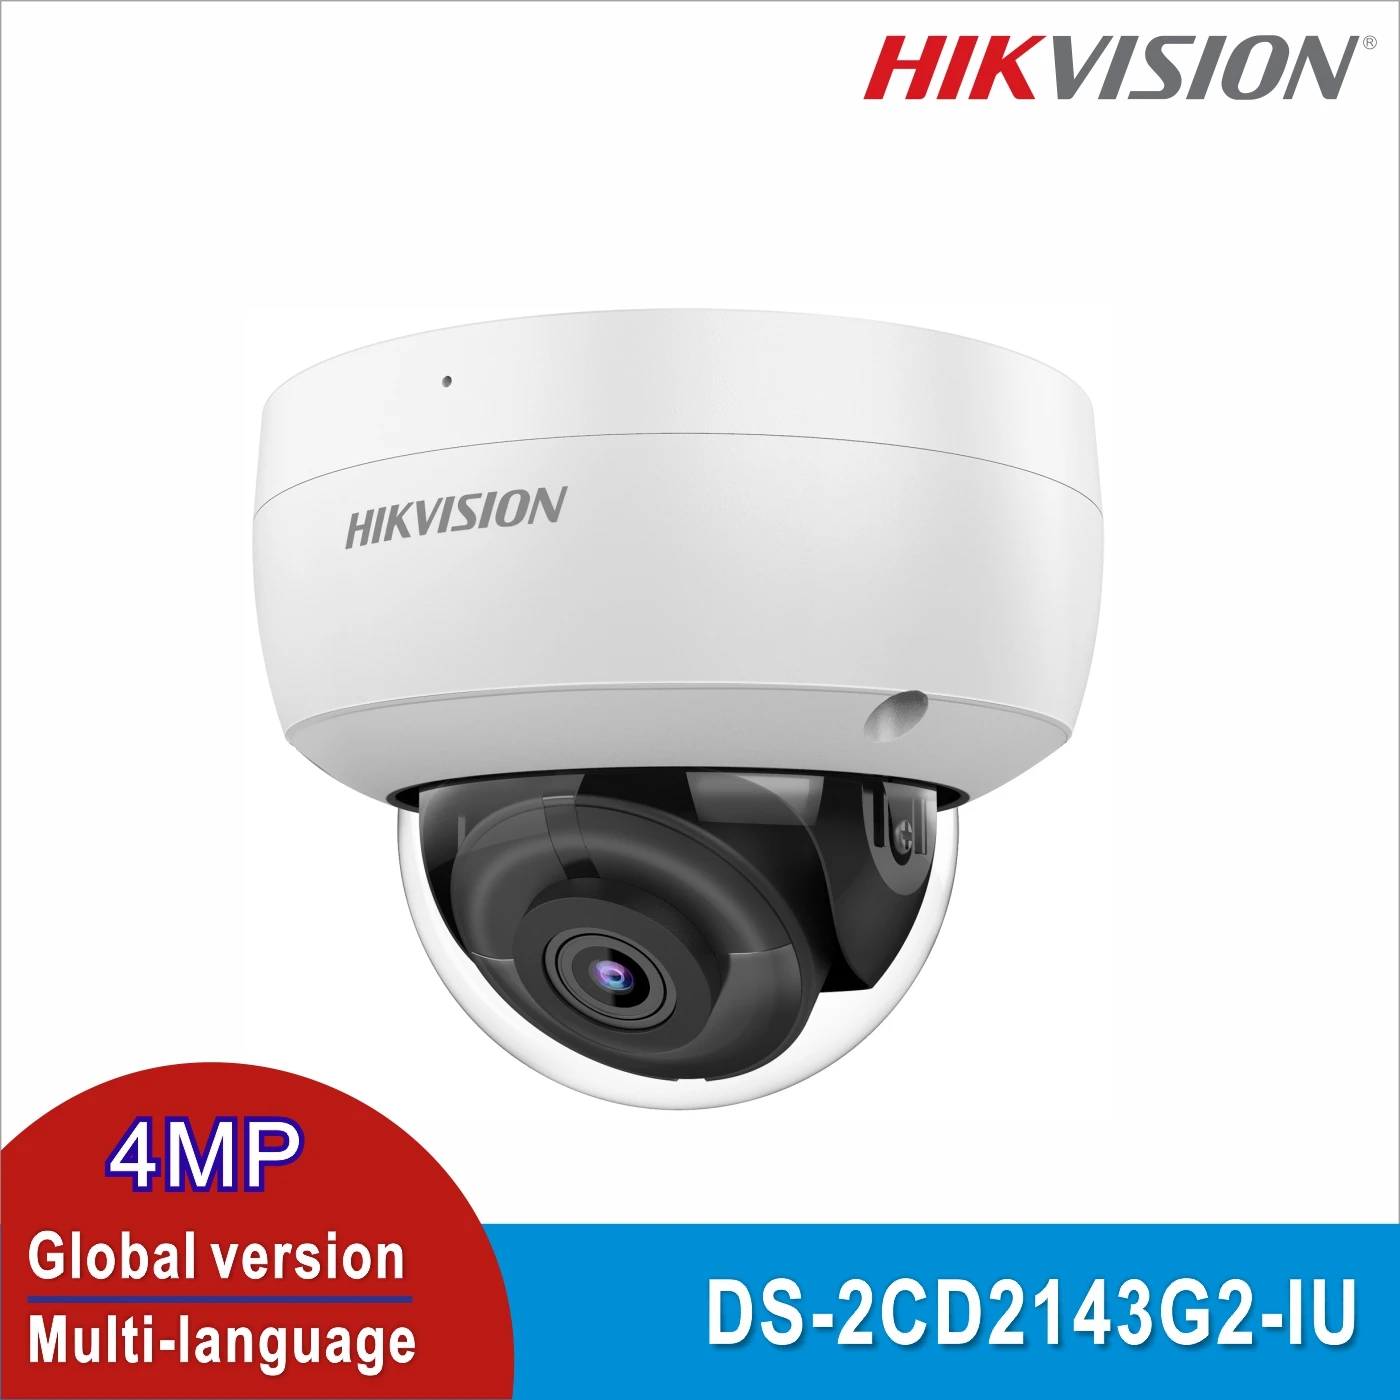 

Original Hikvision DS-2CD2143G2-IU 4 MP Vandal Built-in Mic Fixed Dome Network Camera Water and dust resistant (IP67) POE H.265+